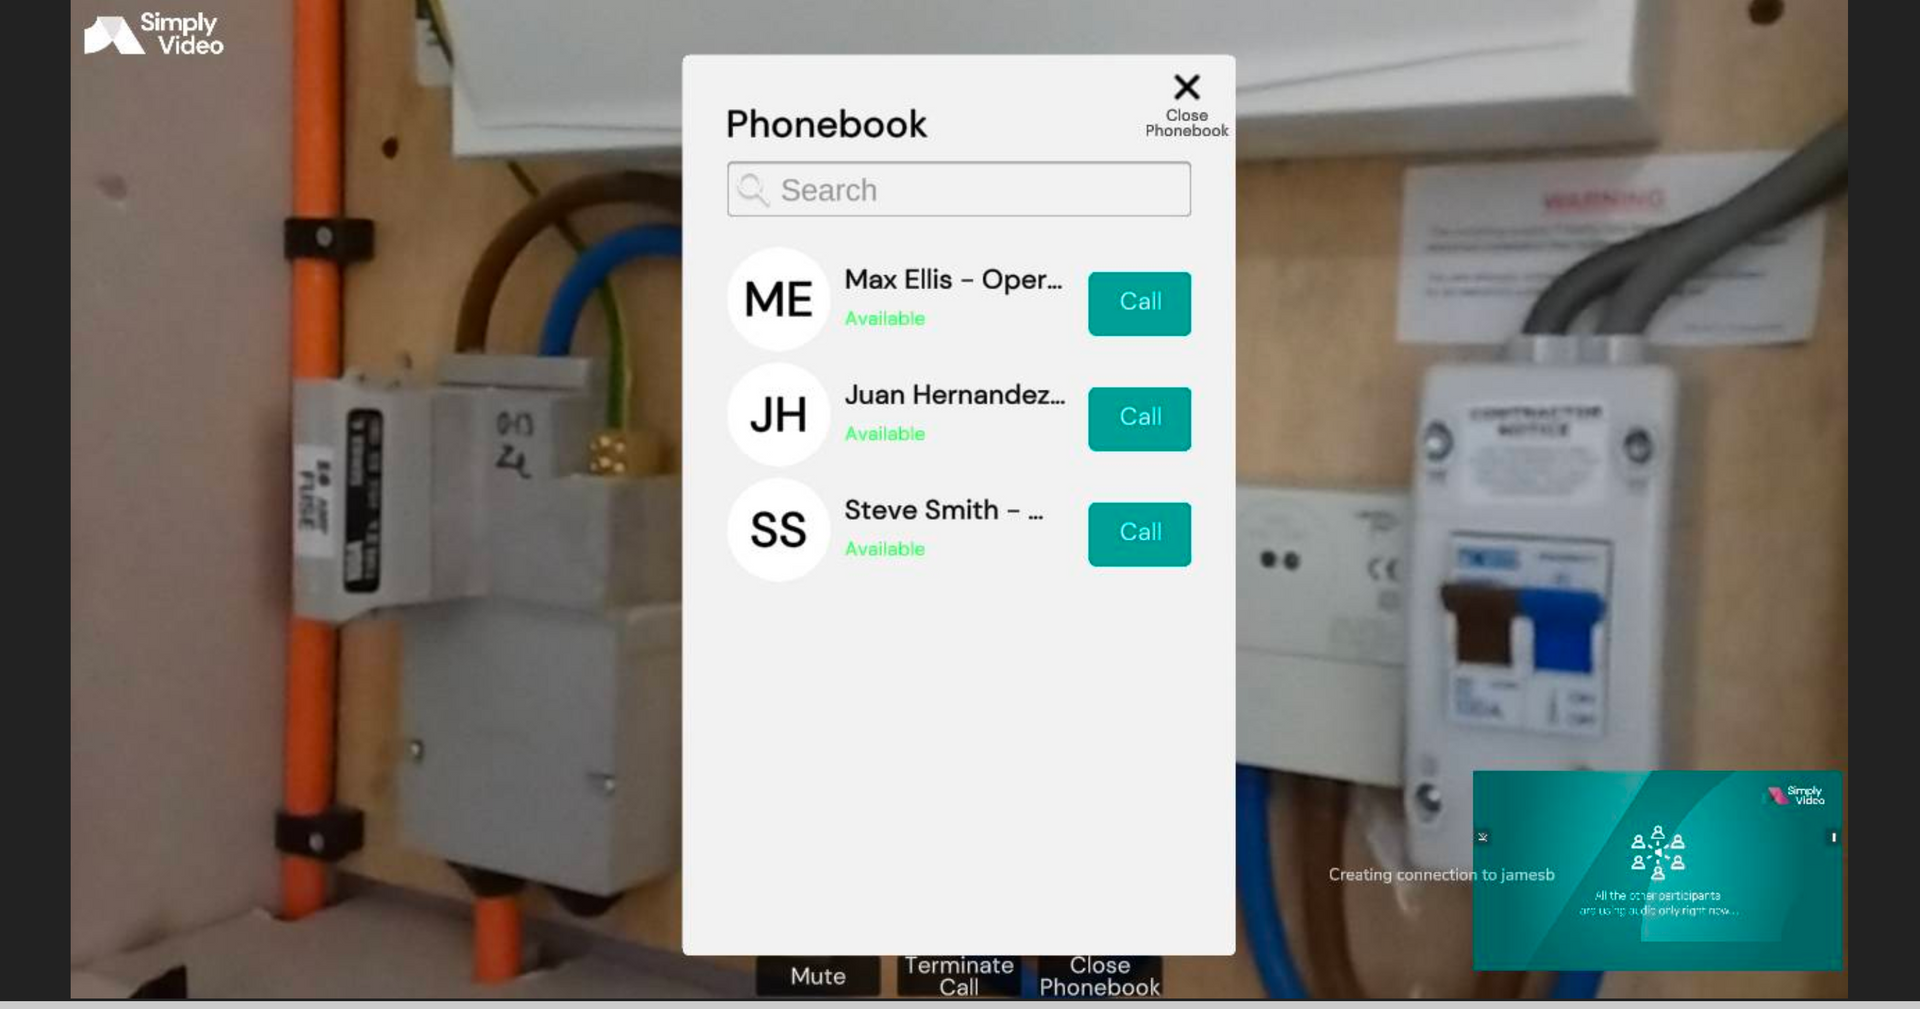 SimplyVideo is proud to announce Phonebook – a new feature that streamlines collaboration like never before. Discover what it can do for your business.